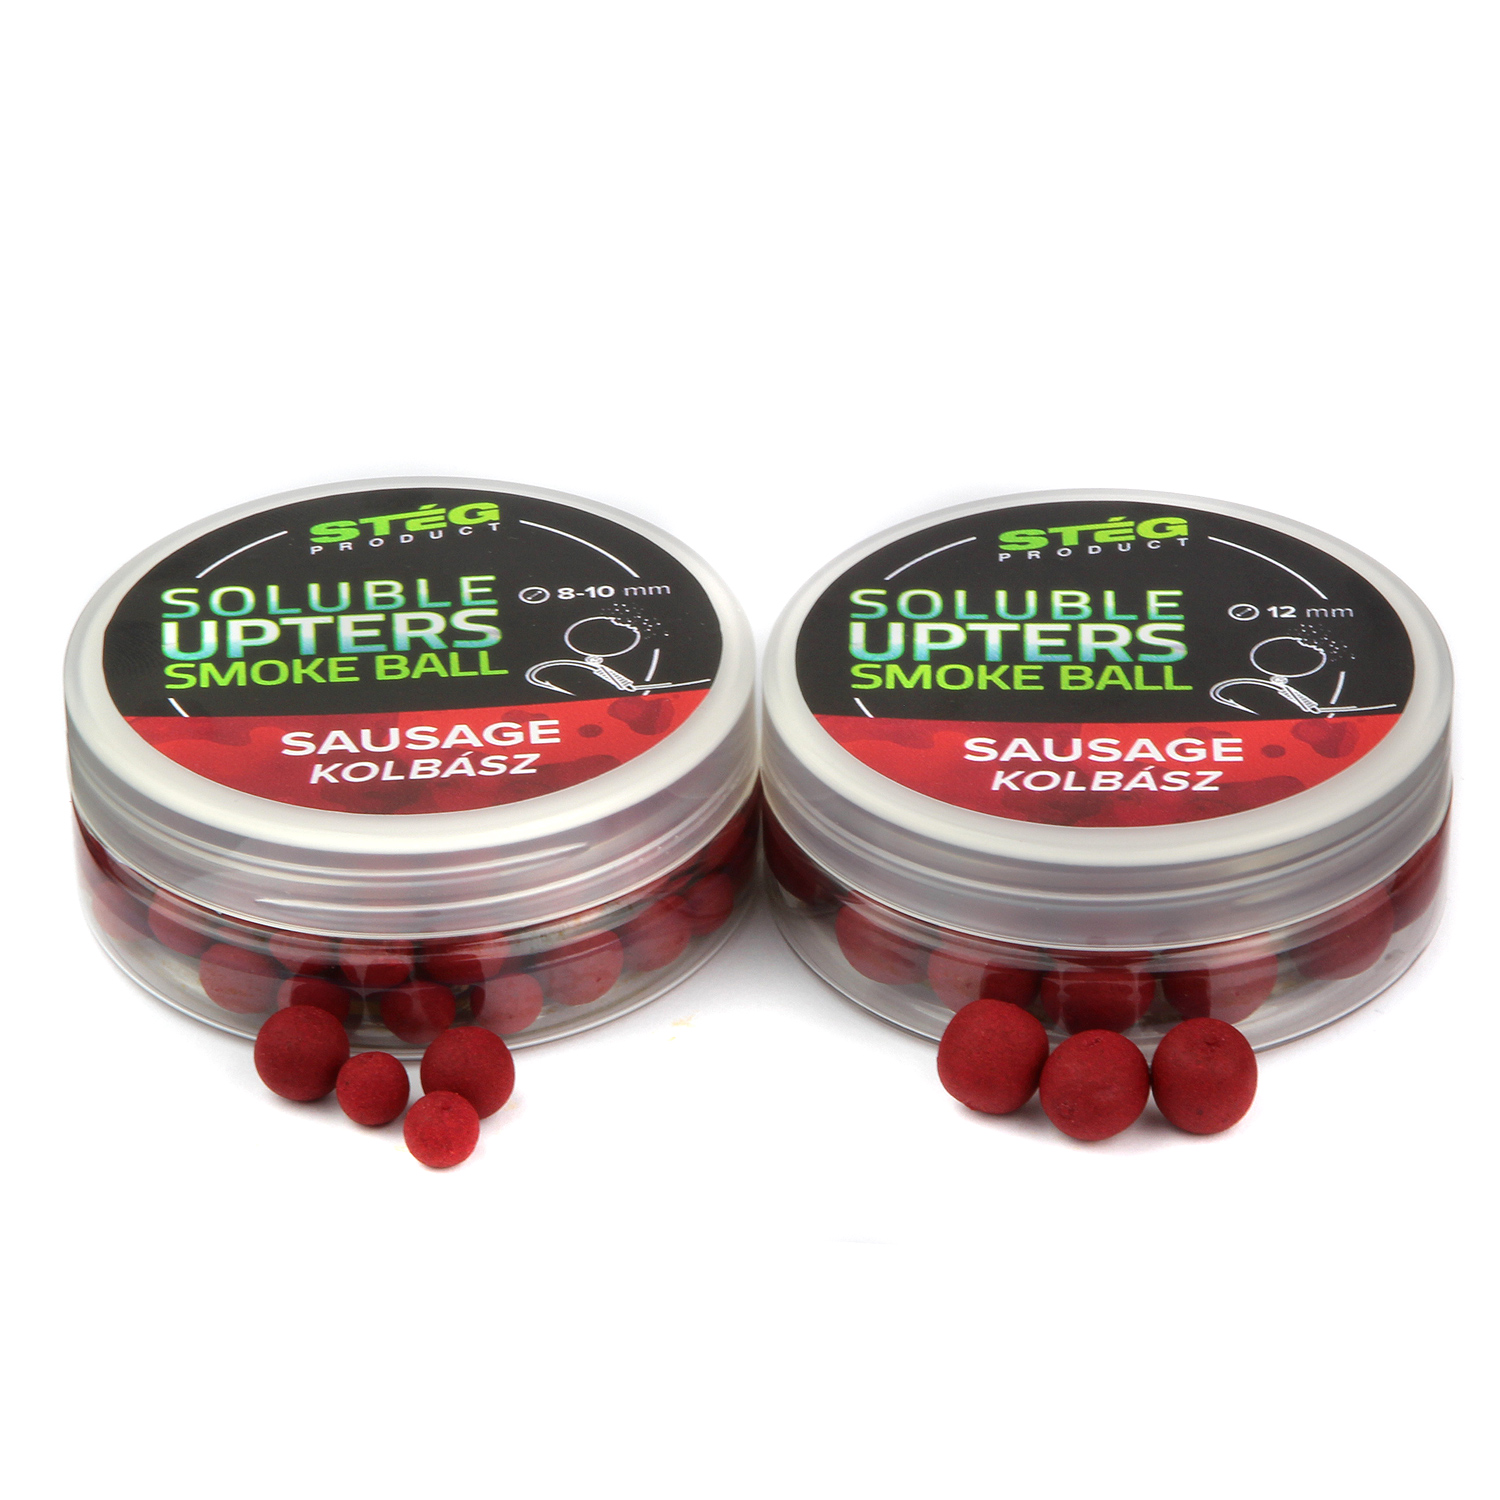 Stg Product Soluble Upters Smoke Ball 12mm Sausage 30g